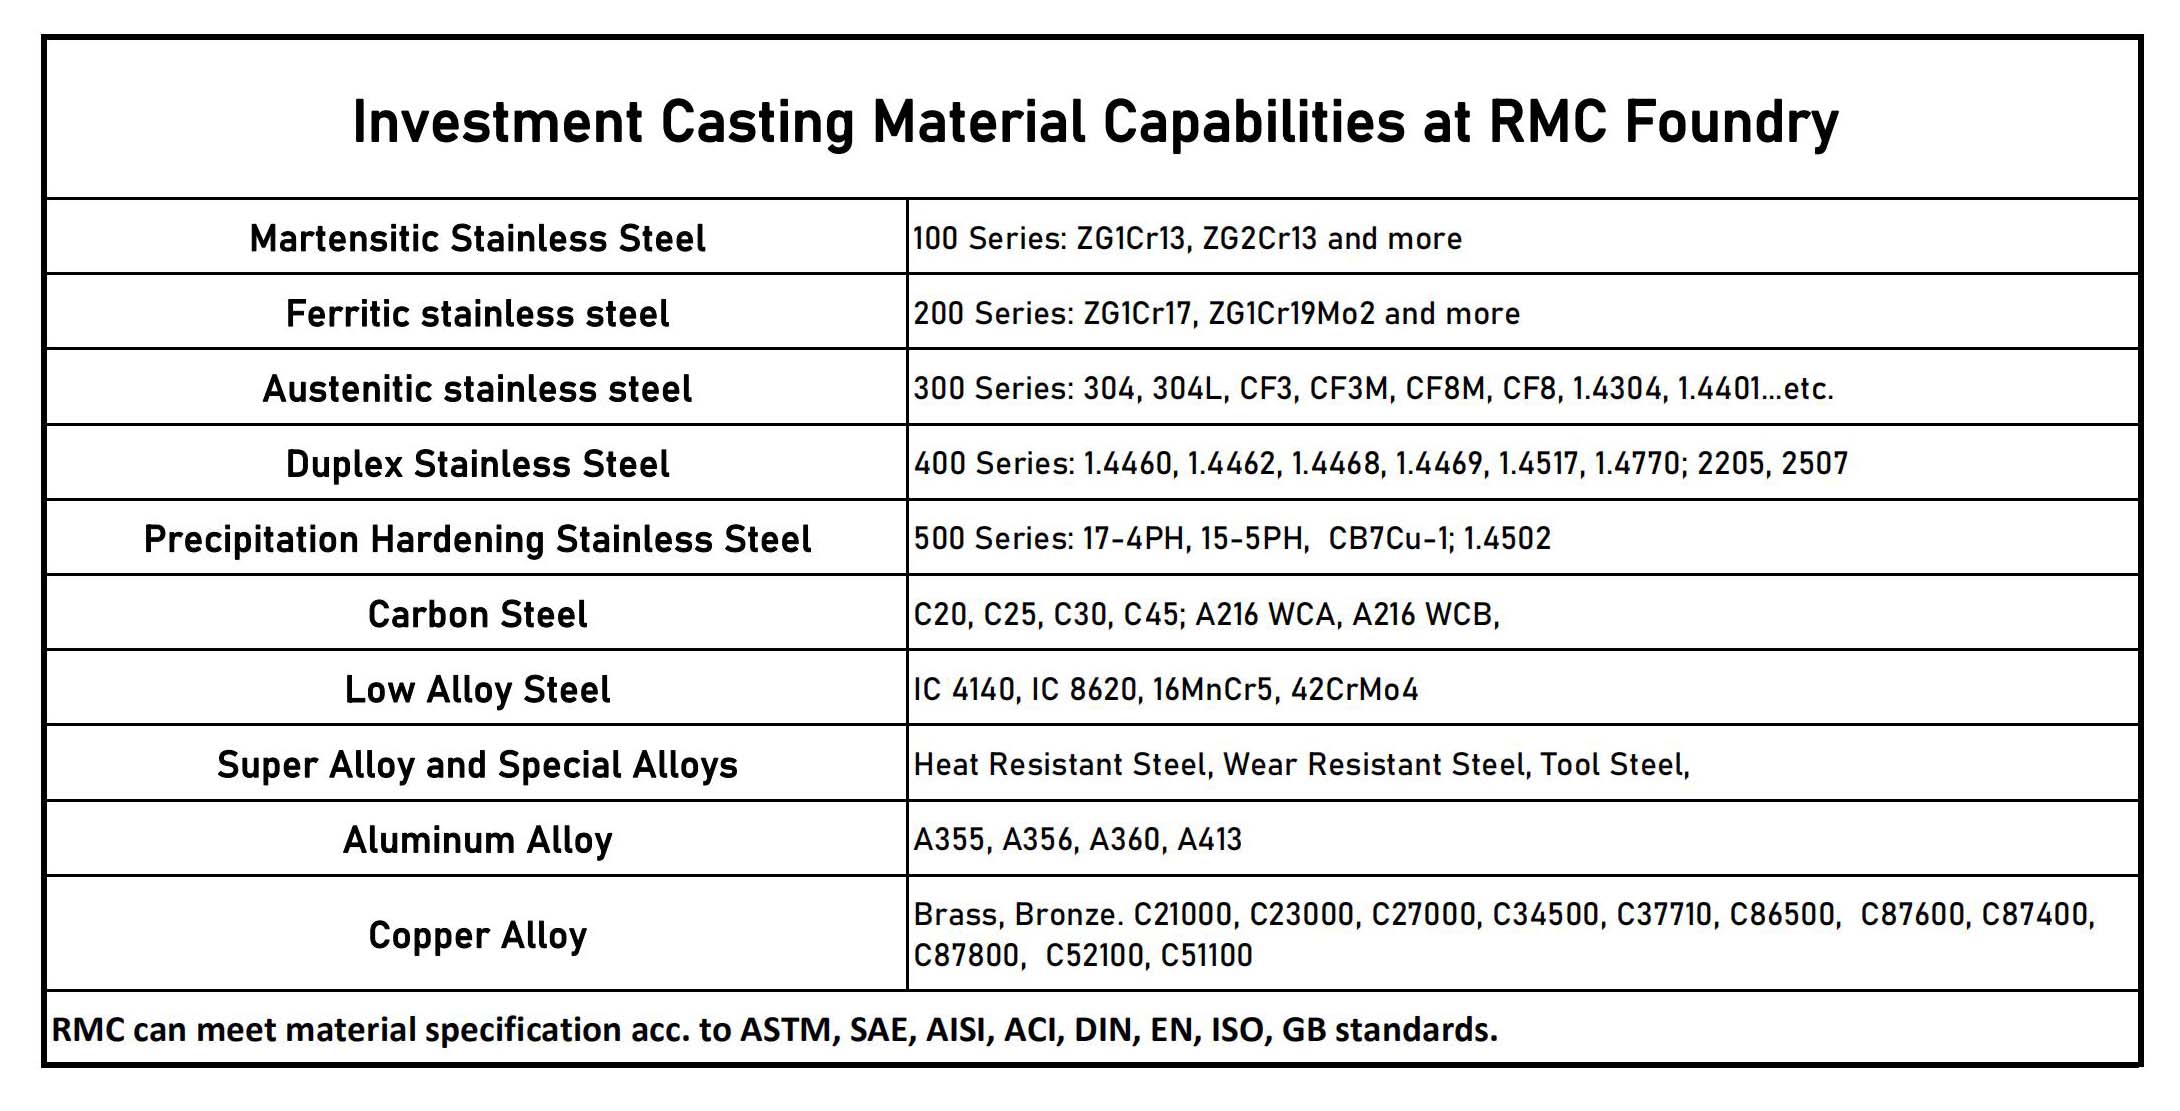 metal and alloys by investment casting